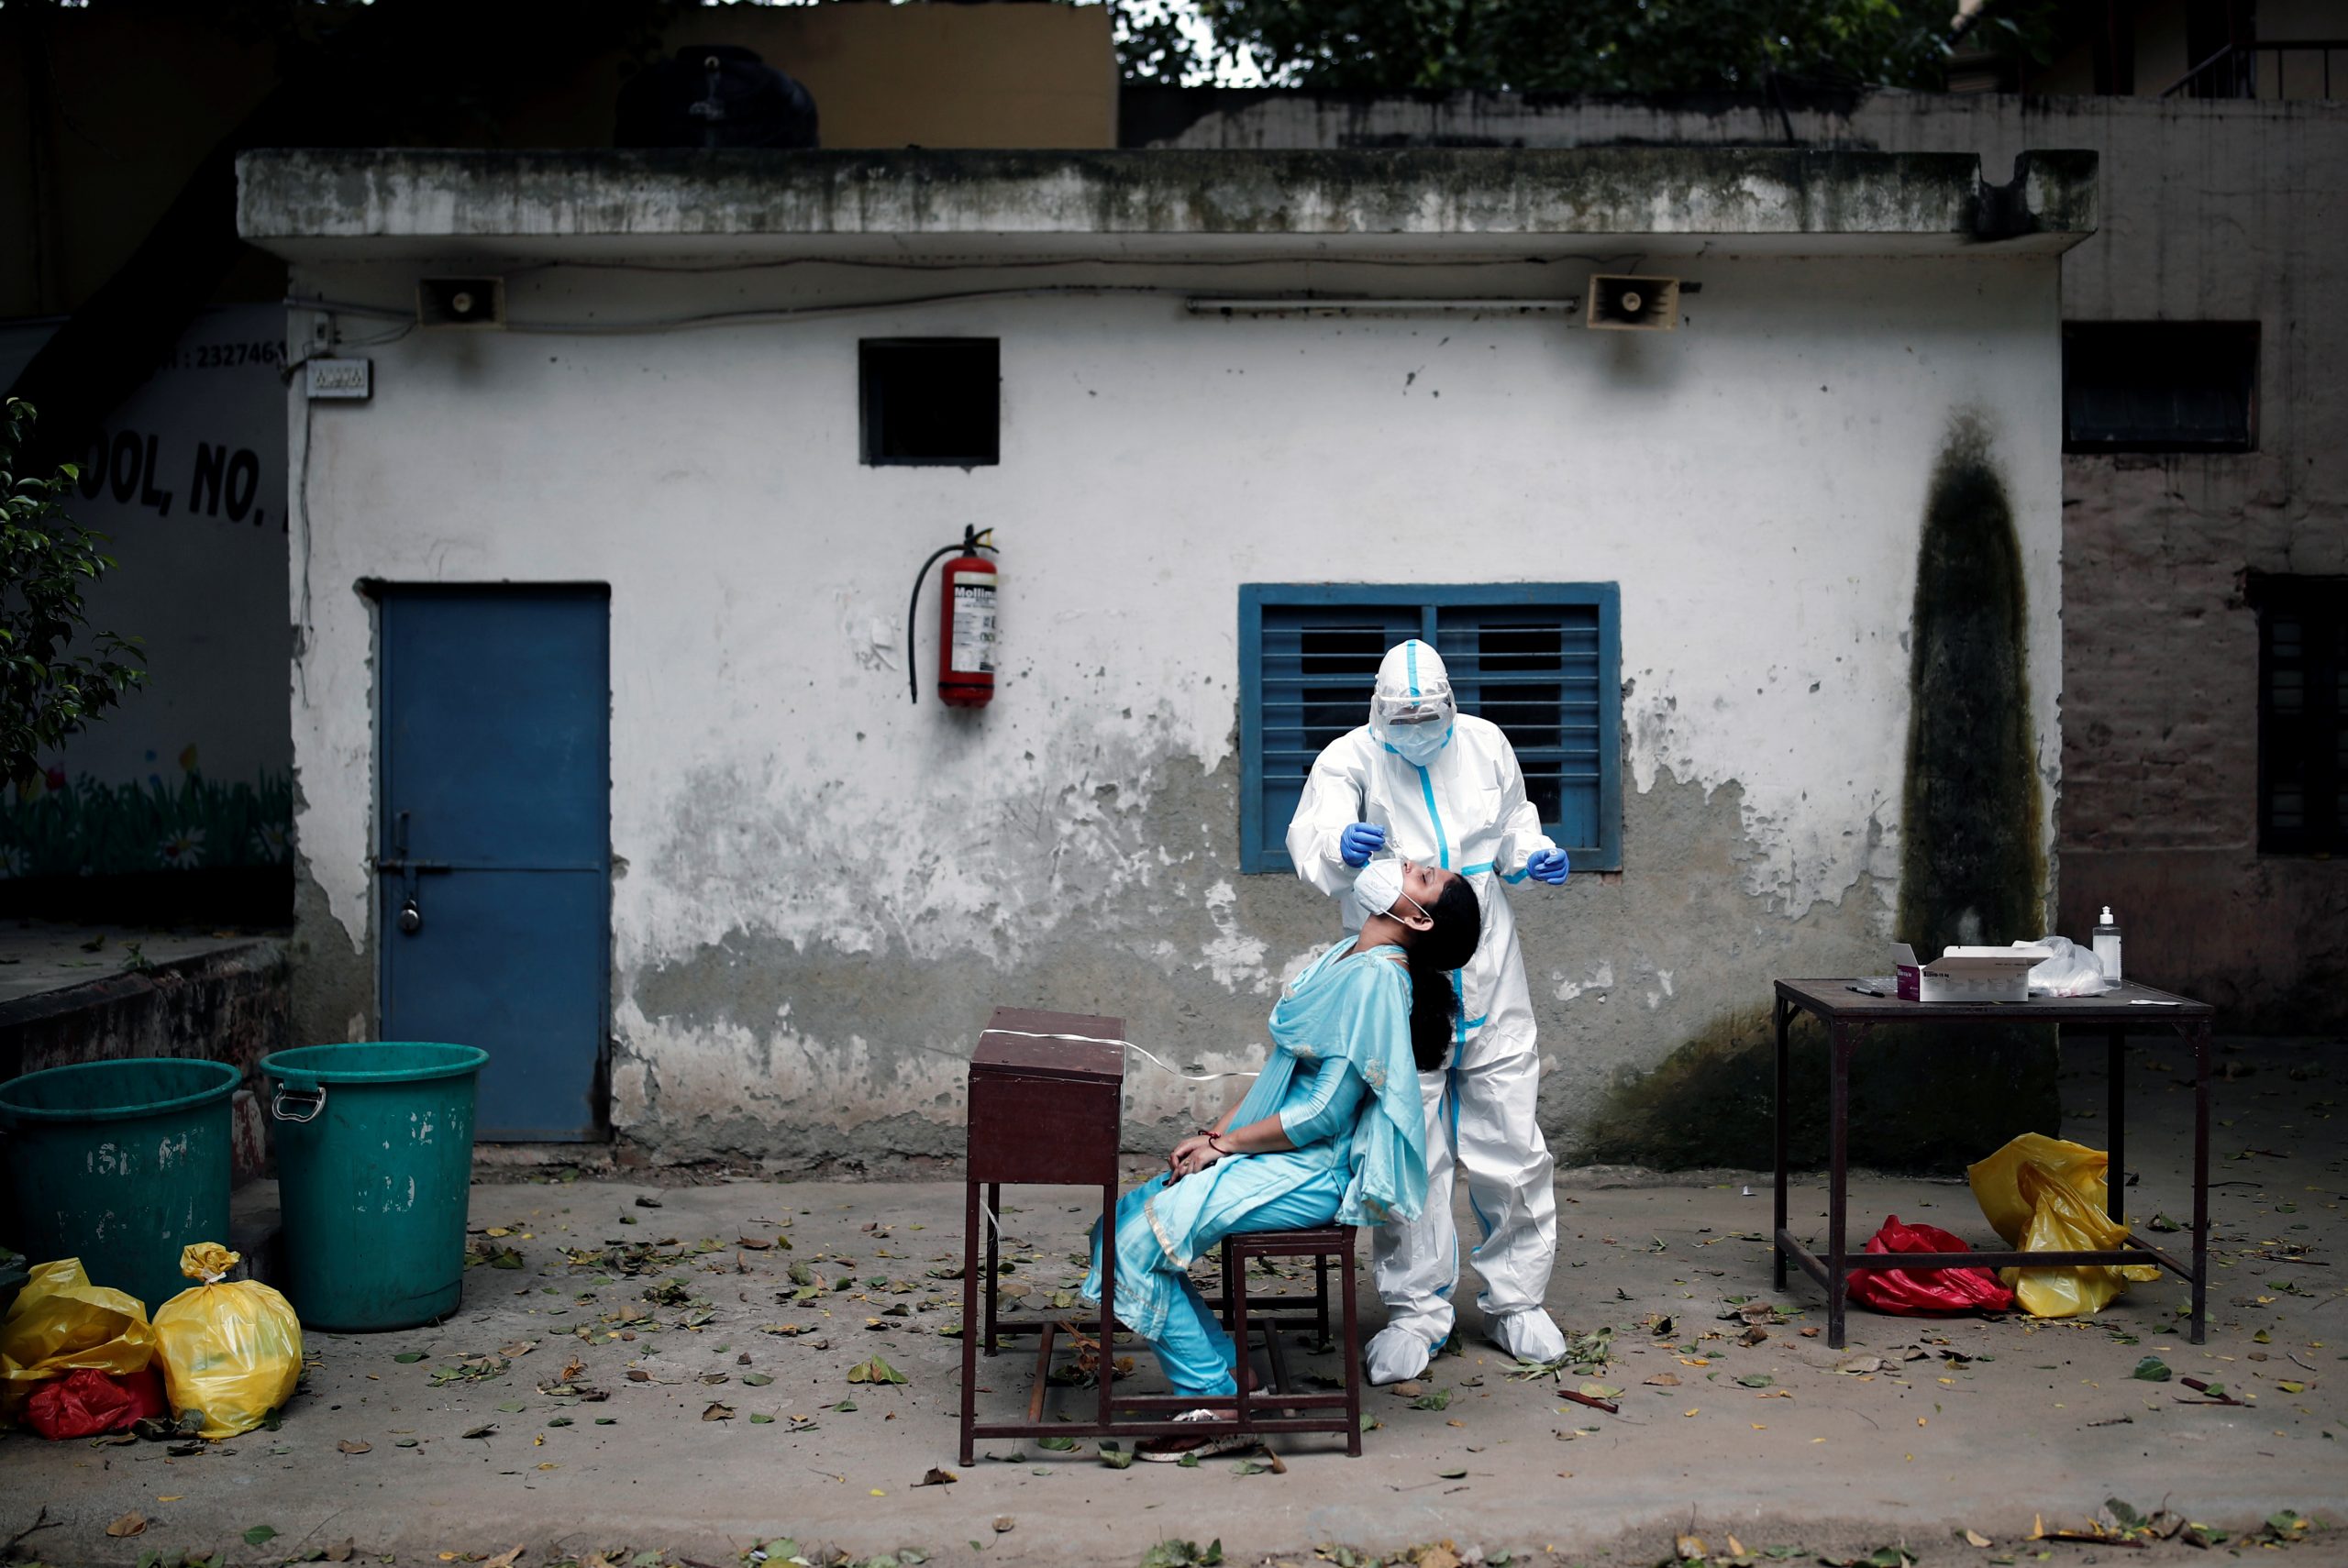 A health worker in personal protective equipment (PPE) collects a sample using a swab from a person at a school which was turned into a centre to conduct tests for the coronavirus disease (COVID-19), amidst the spread of the disease, in New Delhi, India, August 6, 2020. REUTERS/Adnan Abidi